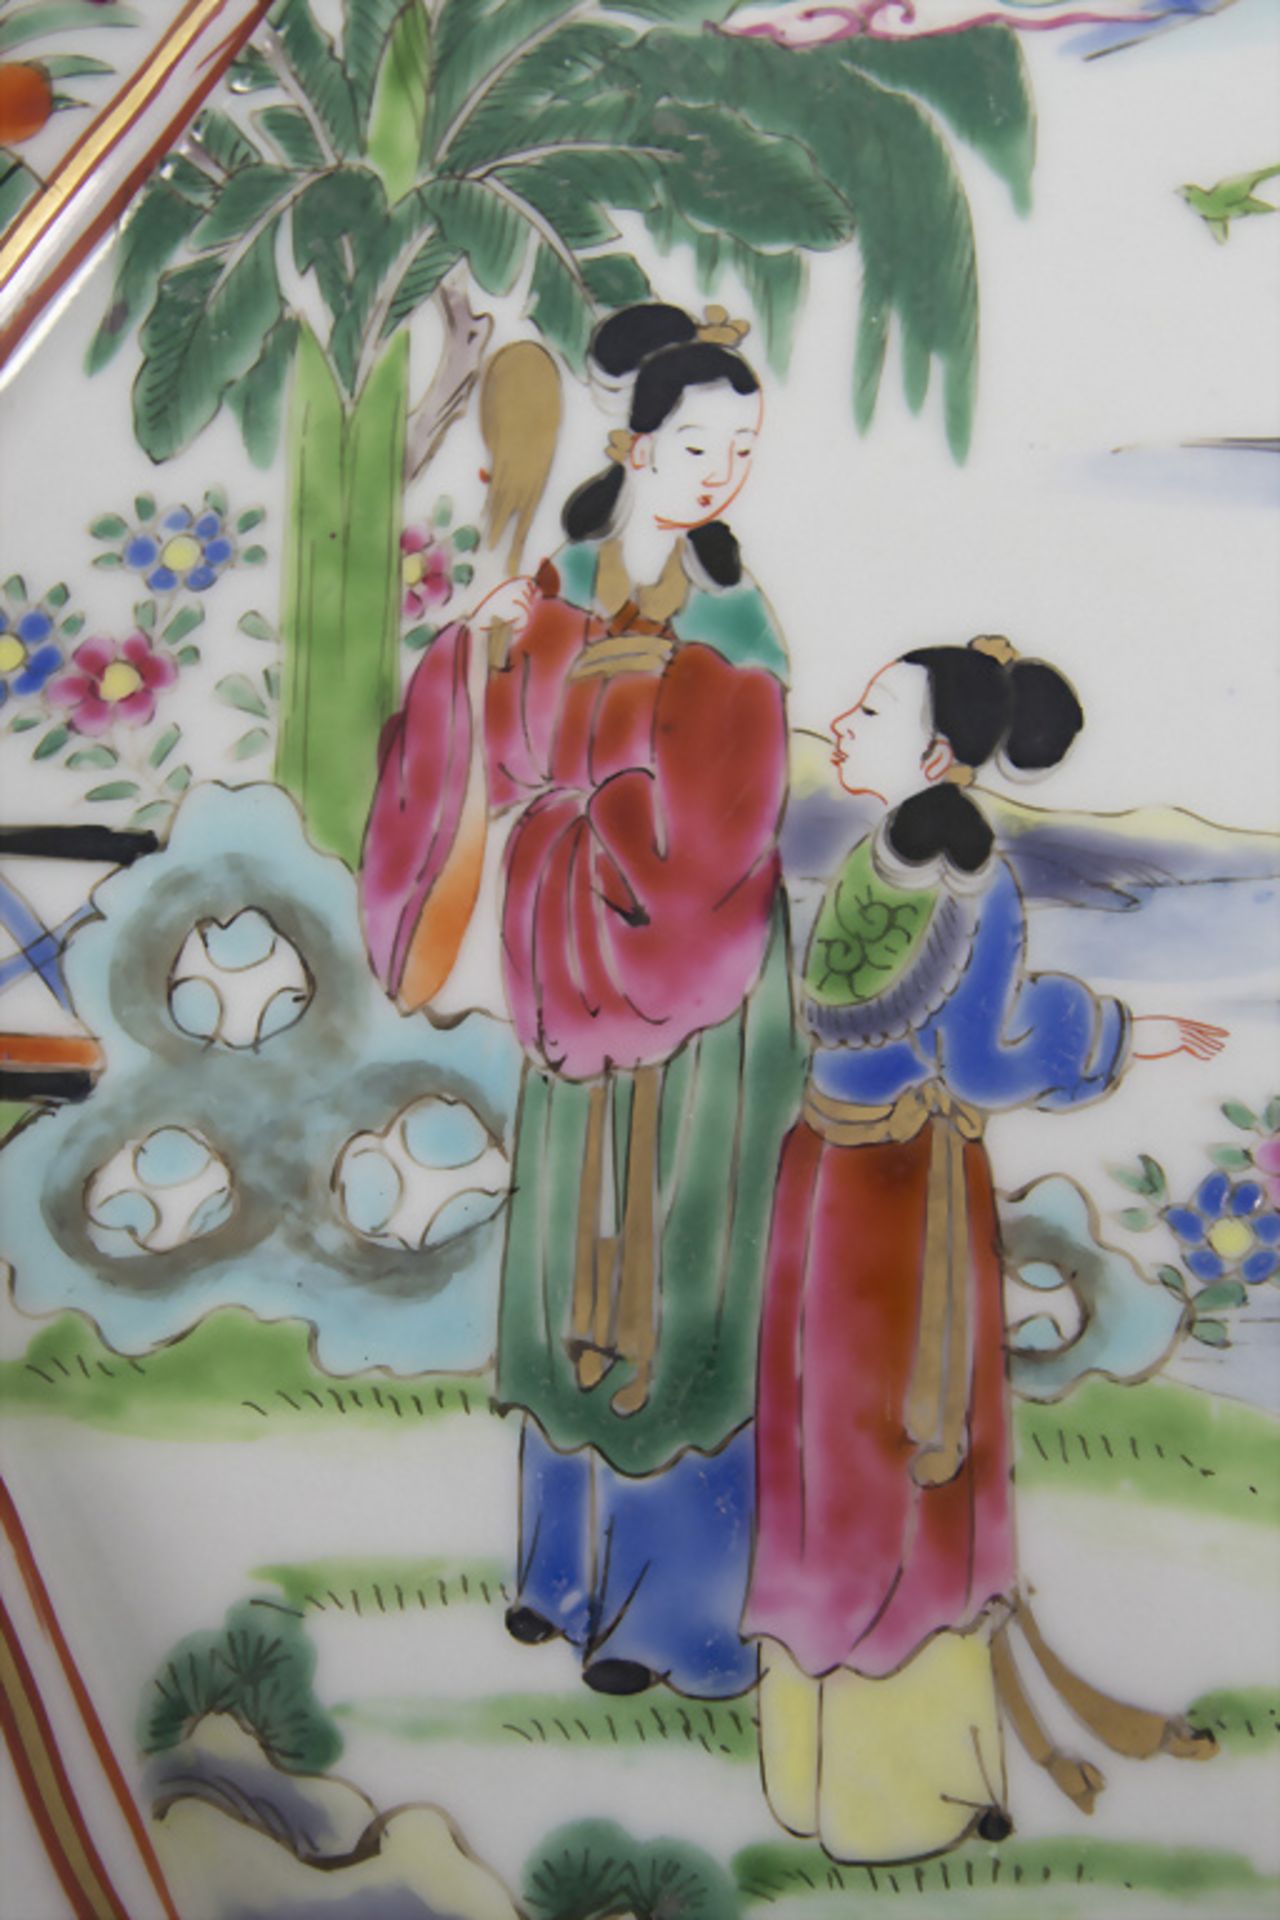 Zierteller / A decorative plate, China oder Japan, 19. Jh. - Image 3 of 6